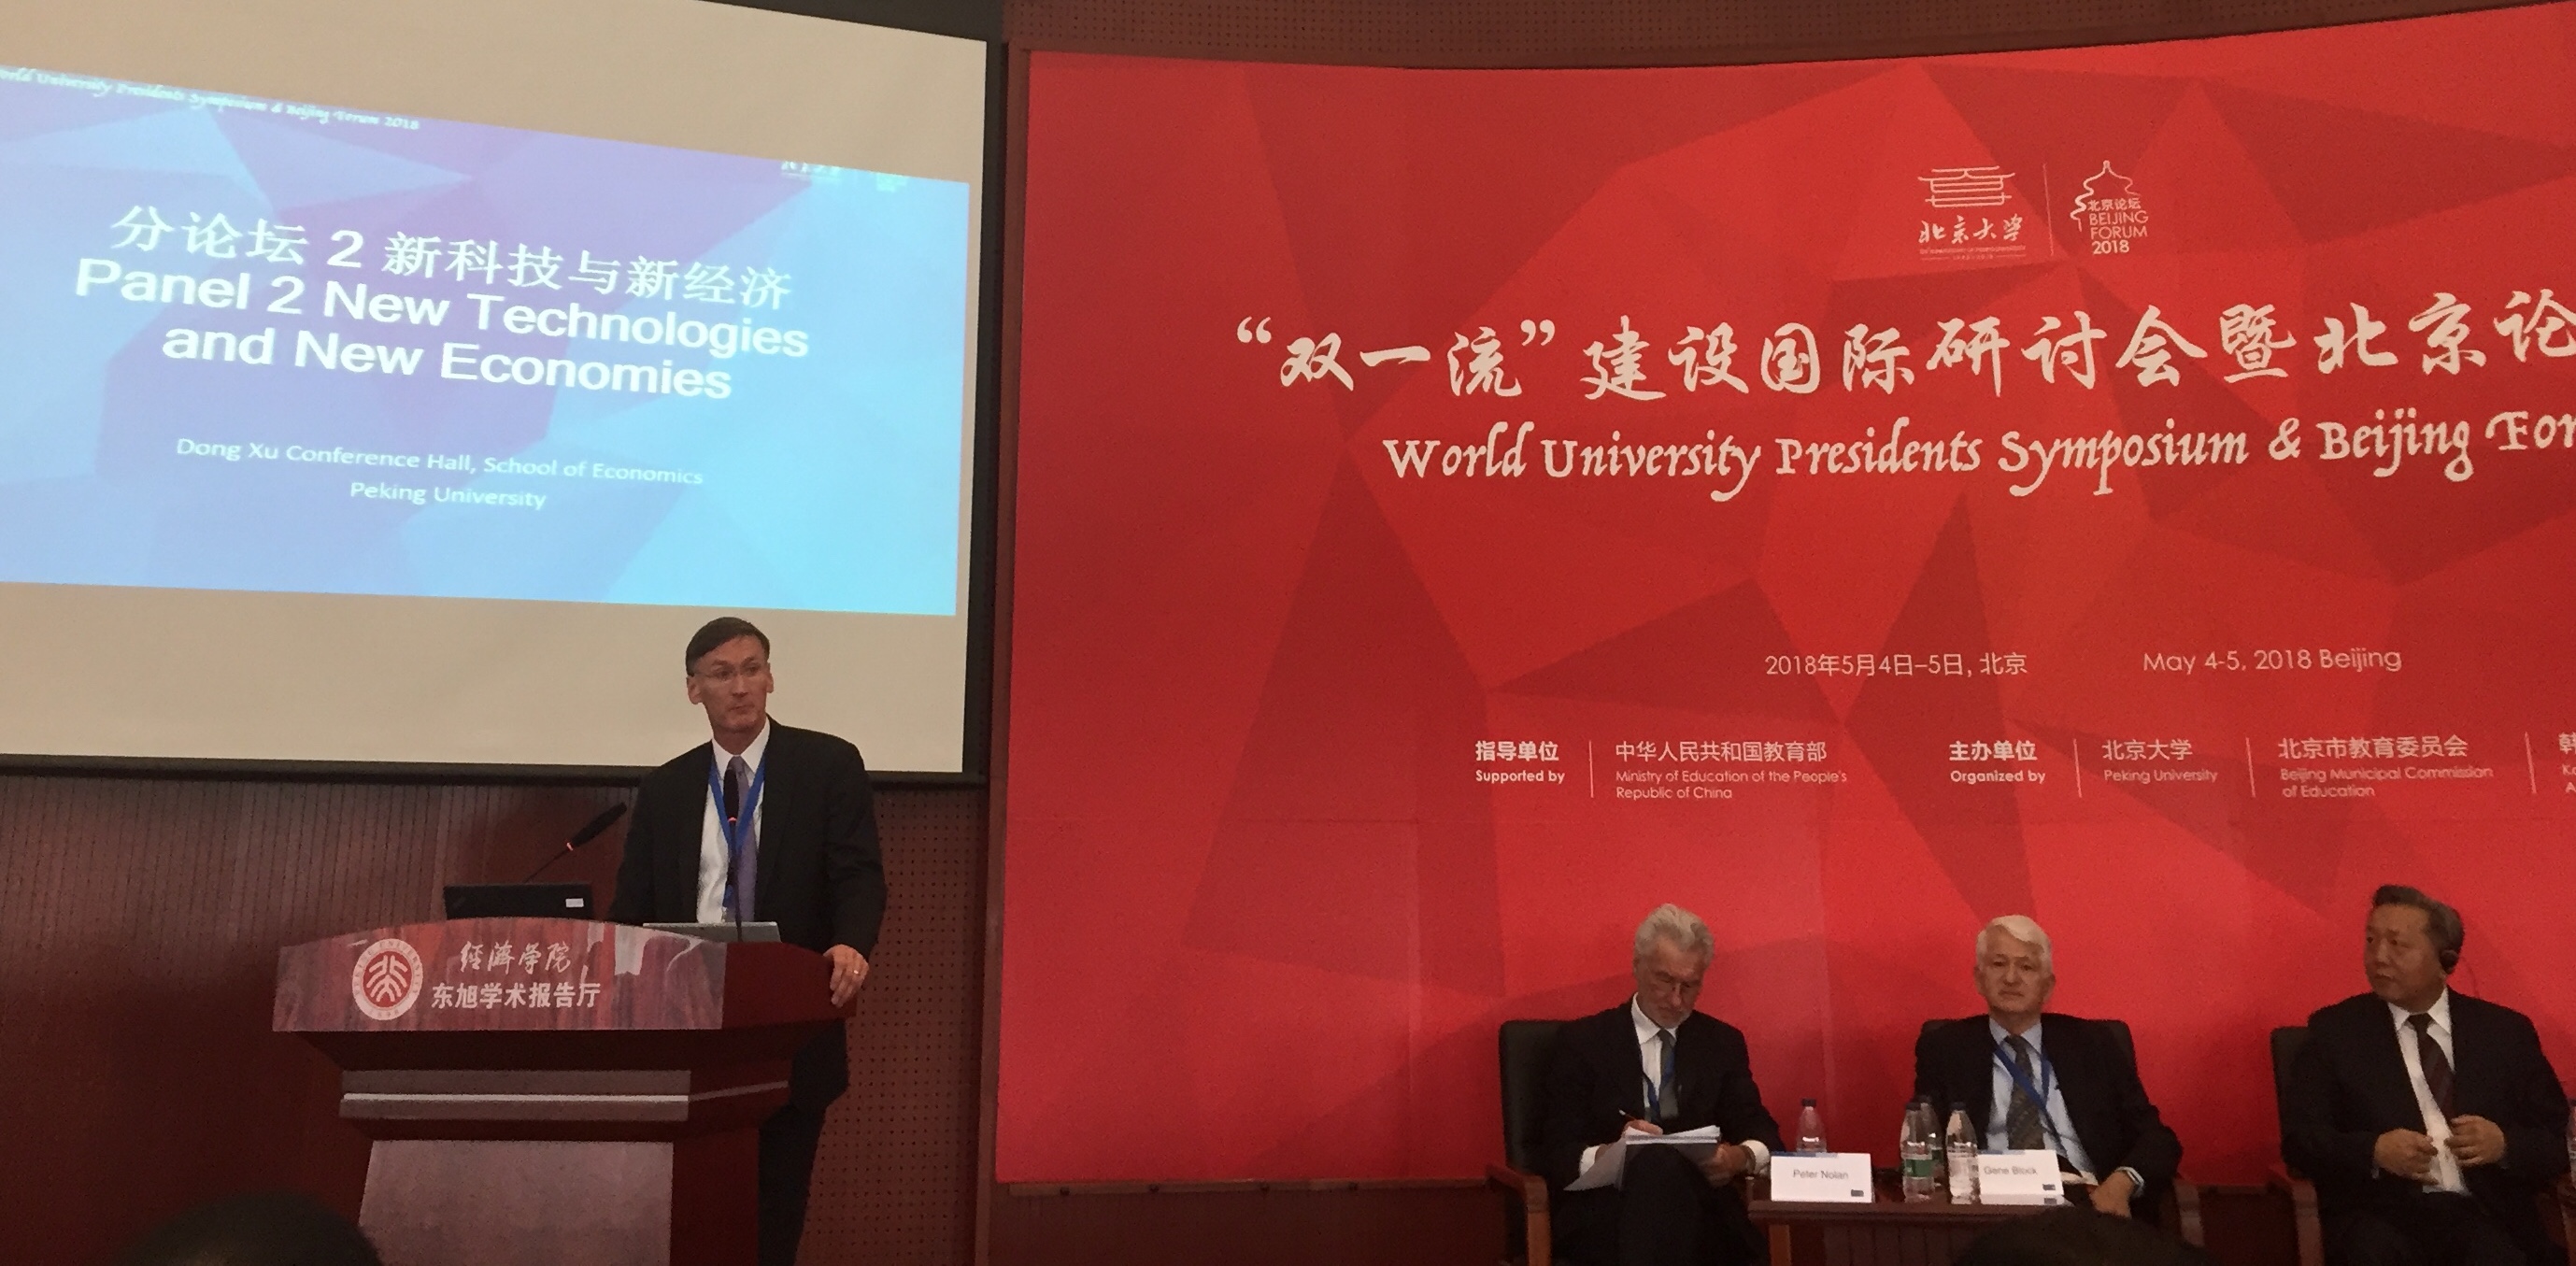 Jay Walsh, Northwestern’s vice president for research, presented with fellow “New Technologies and New Economics” panelists Peter Nolan from Cambridge, Gene Block from UCLA, and Xiaoqiu Wu from Renmin University on May 4 at Peking University.